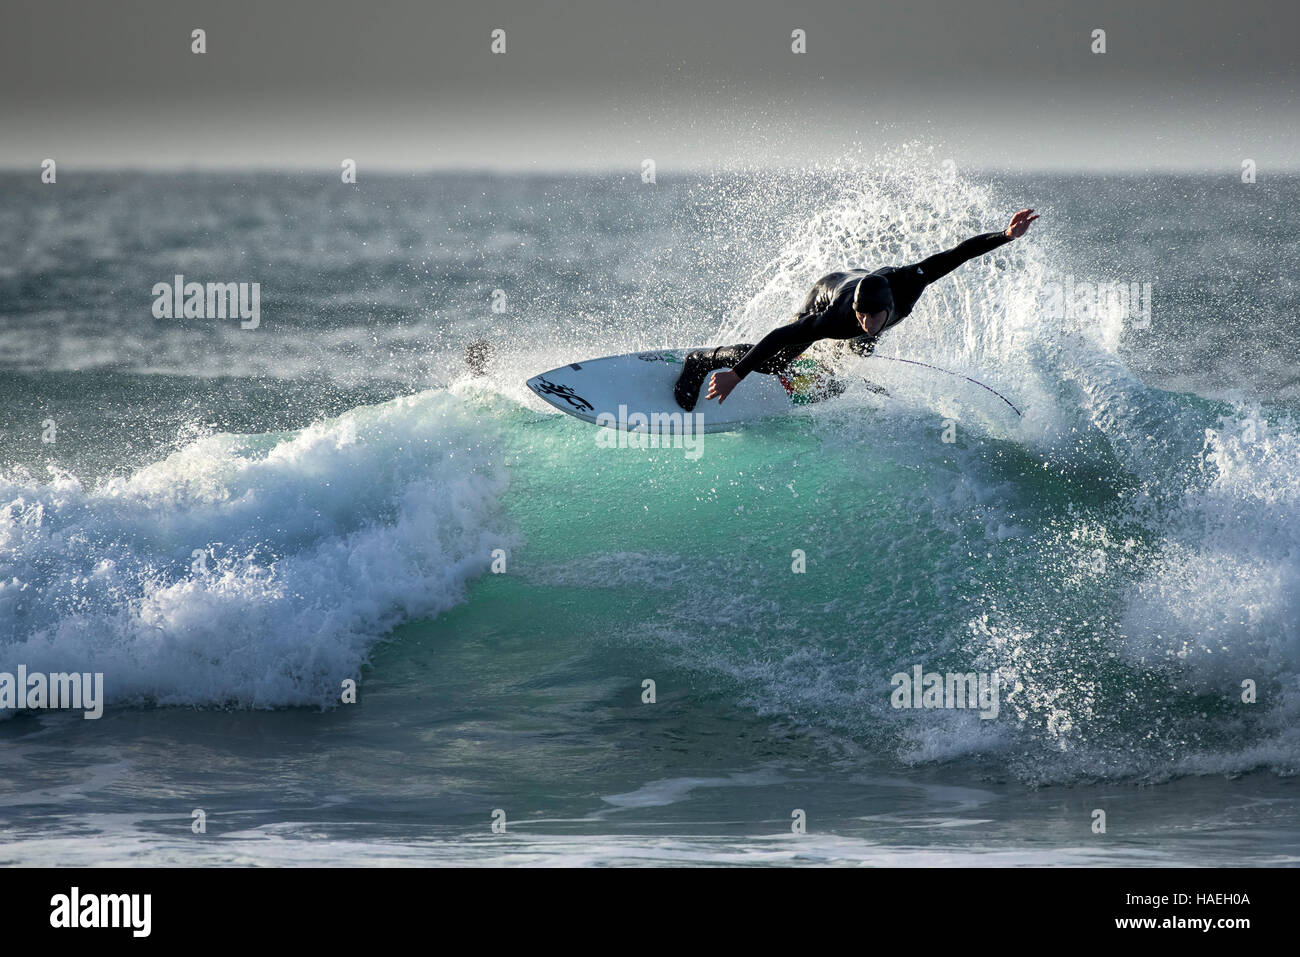 Surfer. Surfing. Fistral. Cornwall. UK. Stock Photo